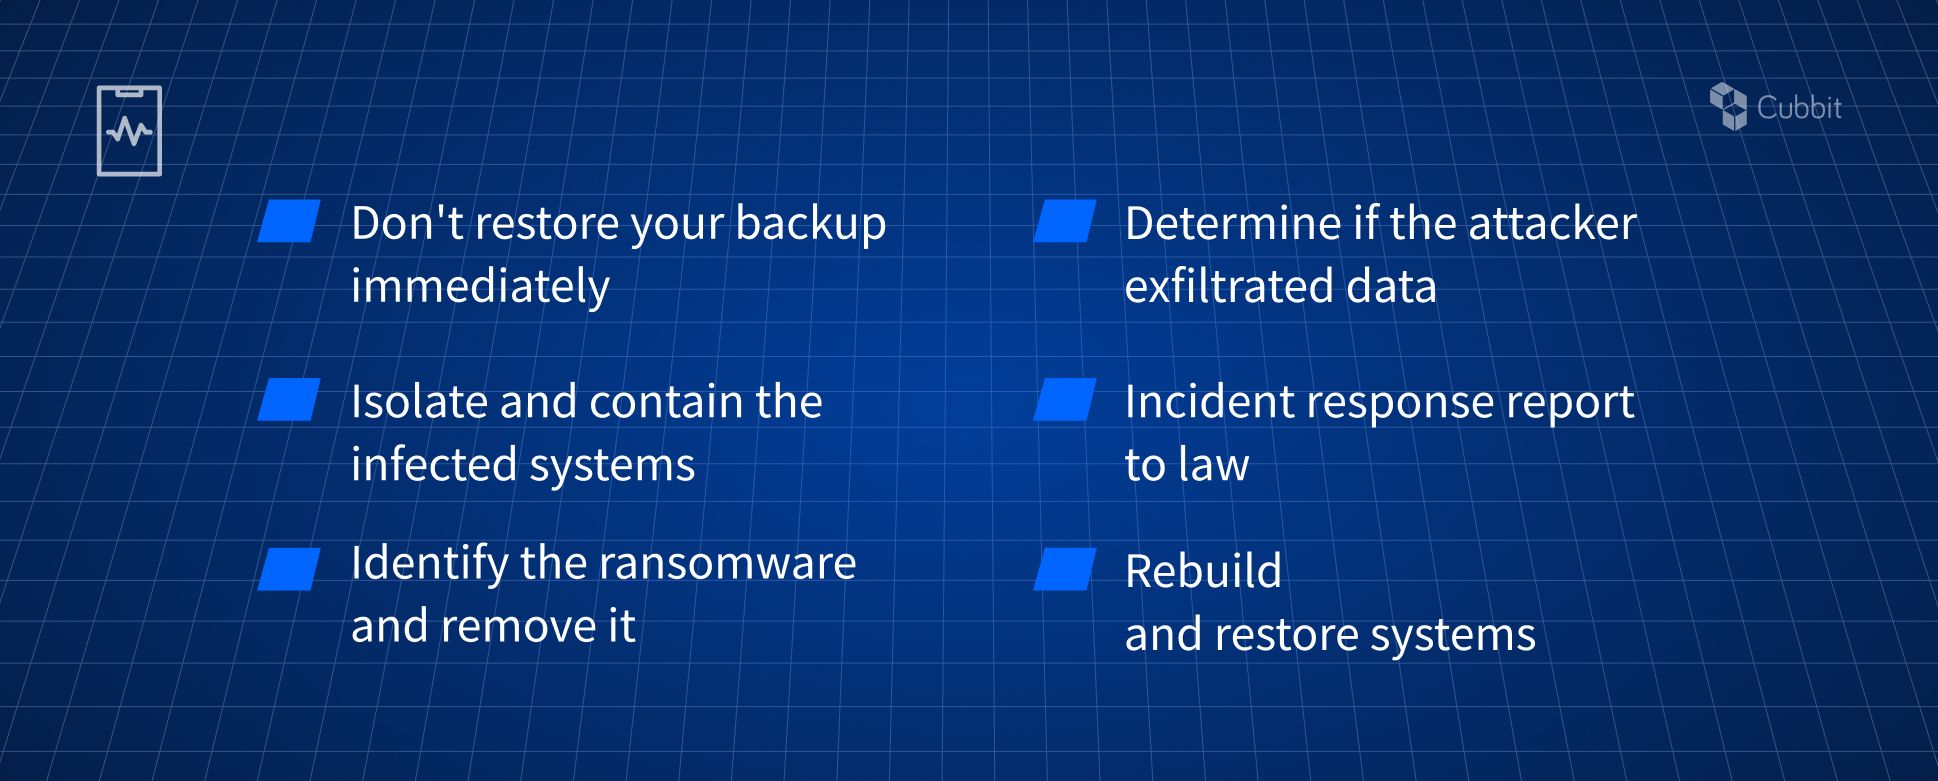 checklist on how to recover from a ransomware attack